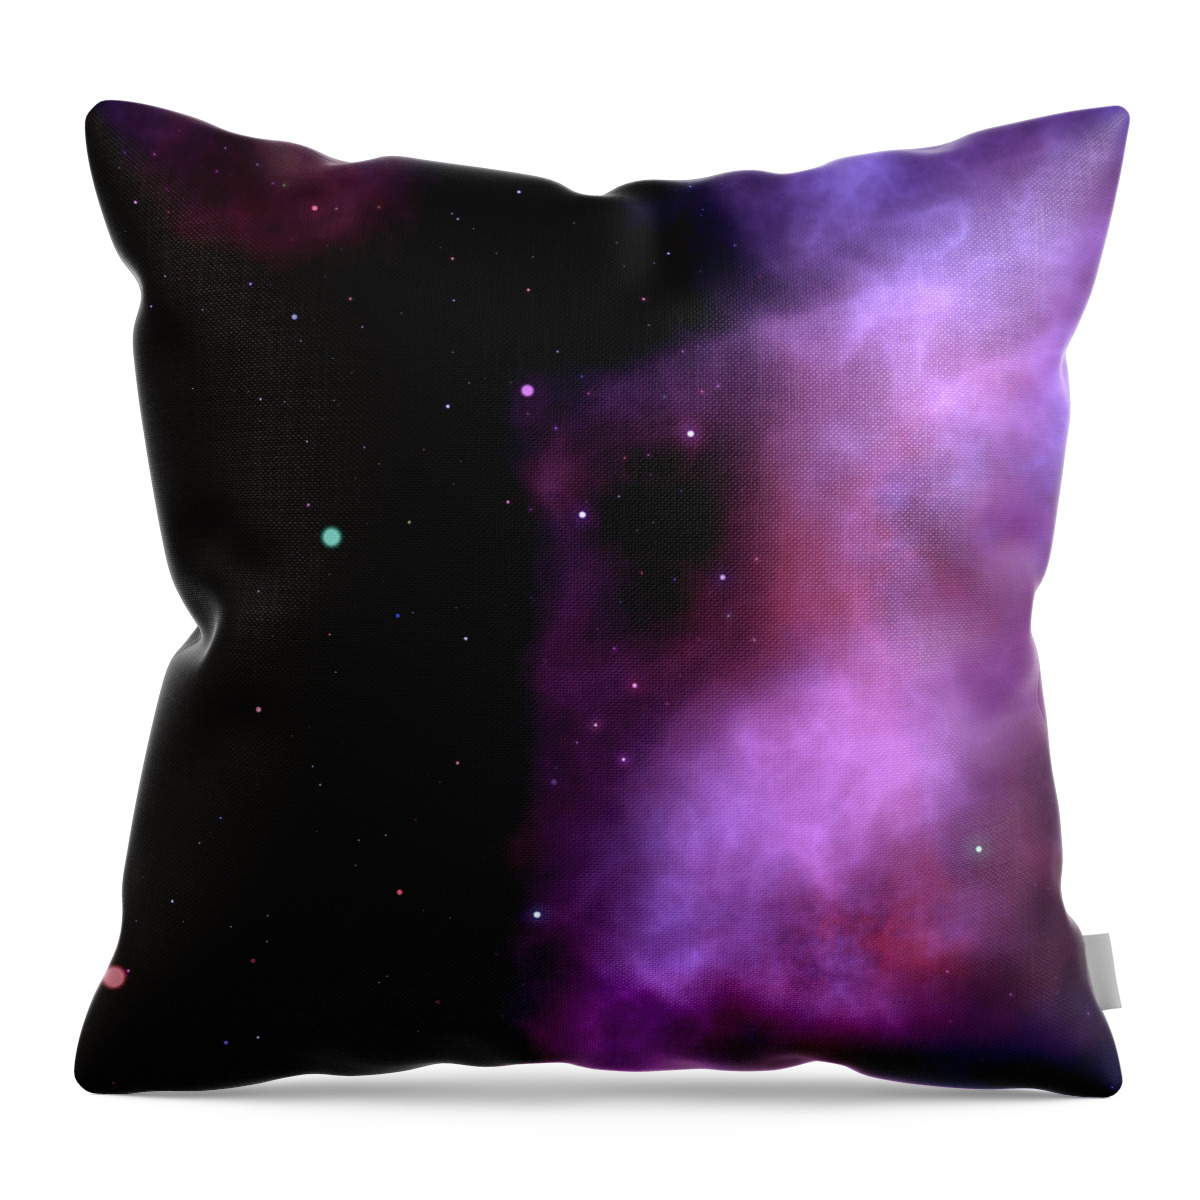 Black Color Throw Pillow featuring the photograph Space With Stars #1 by Dem10